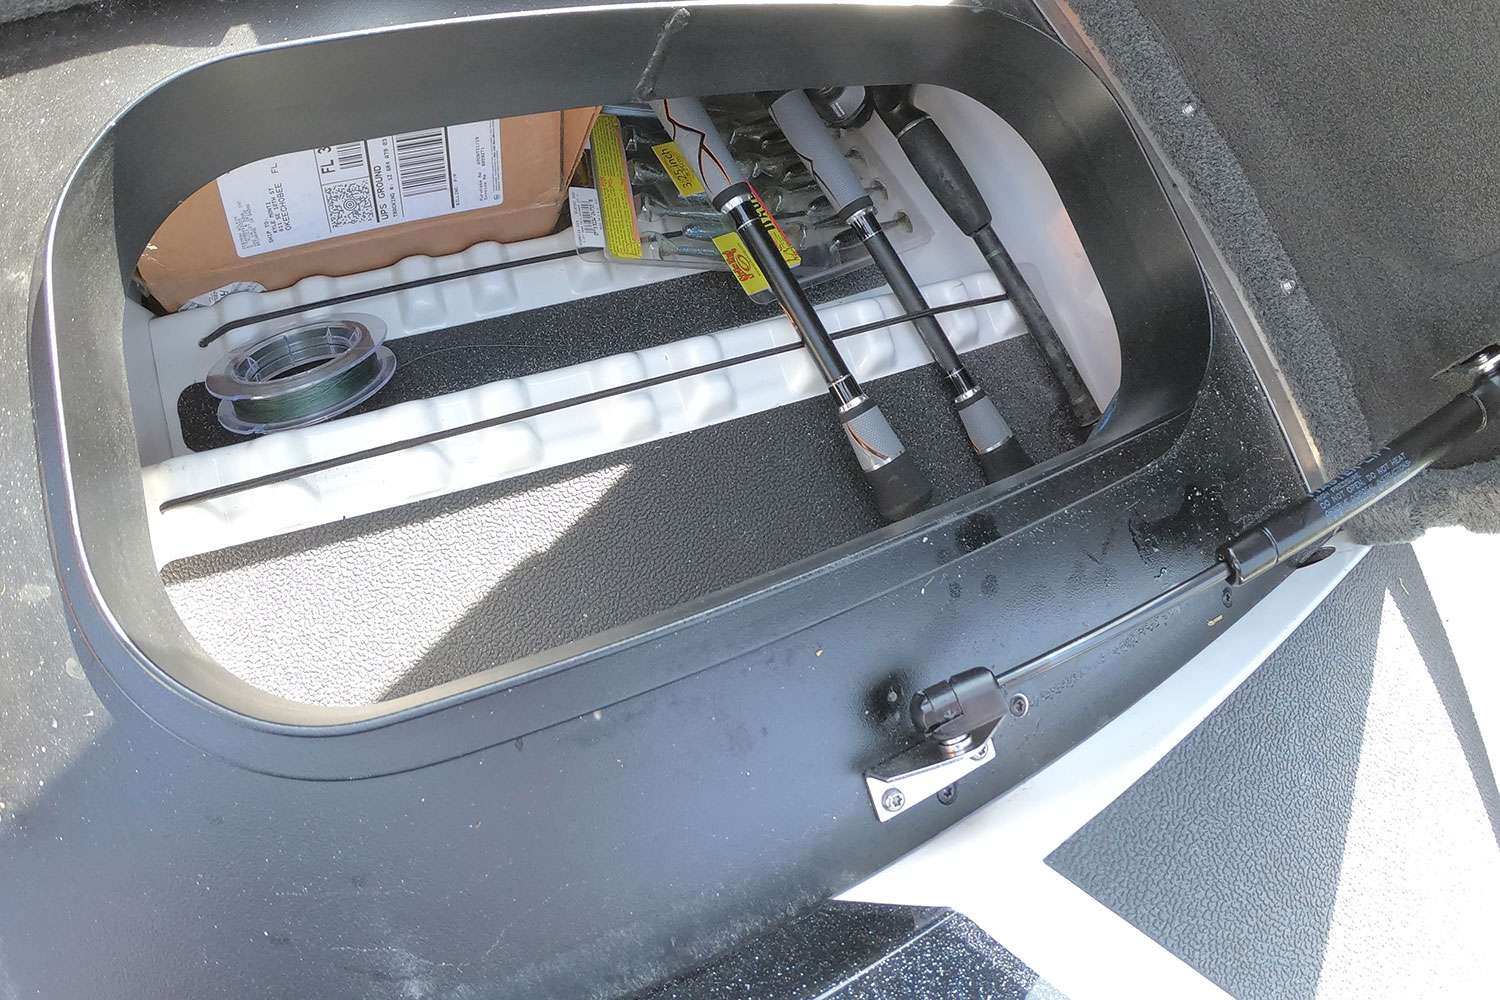 You can remove the tray from that compartment and have instant access to the rear of the driver-side rod locker. 